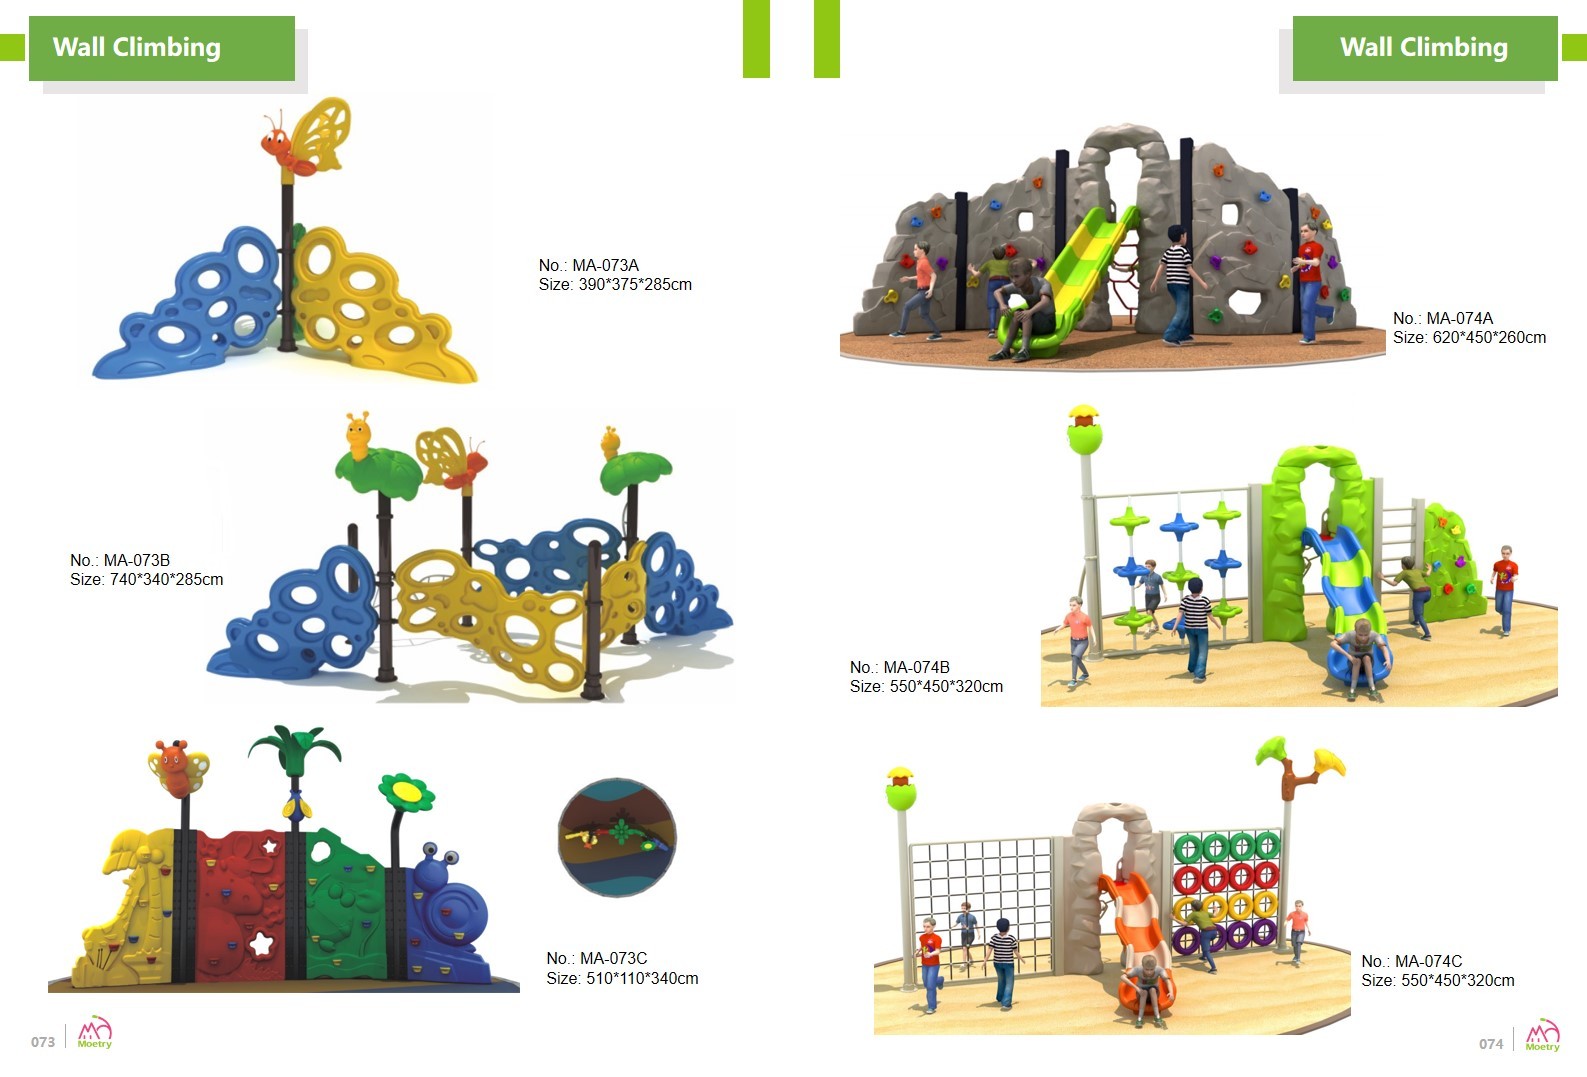 Different types of free standing children's climbing wall rock climber outdoor play equipment in Moetry's catalogue